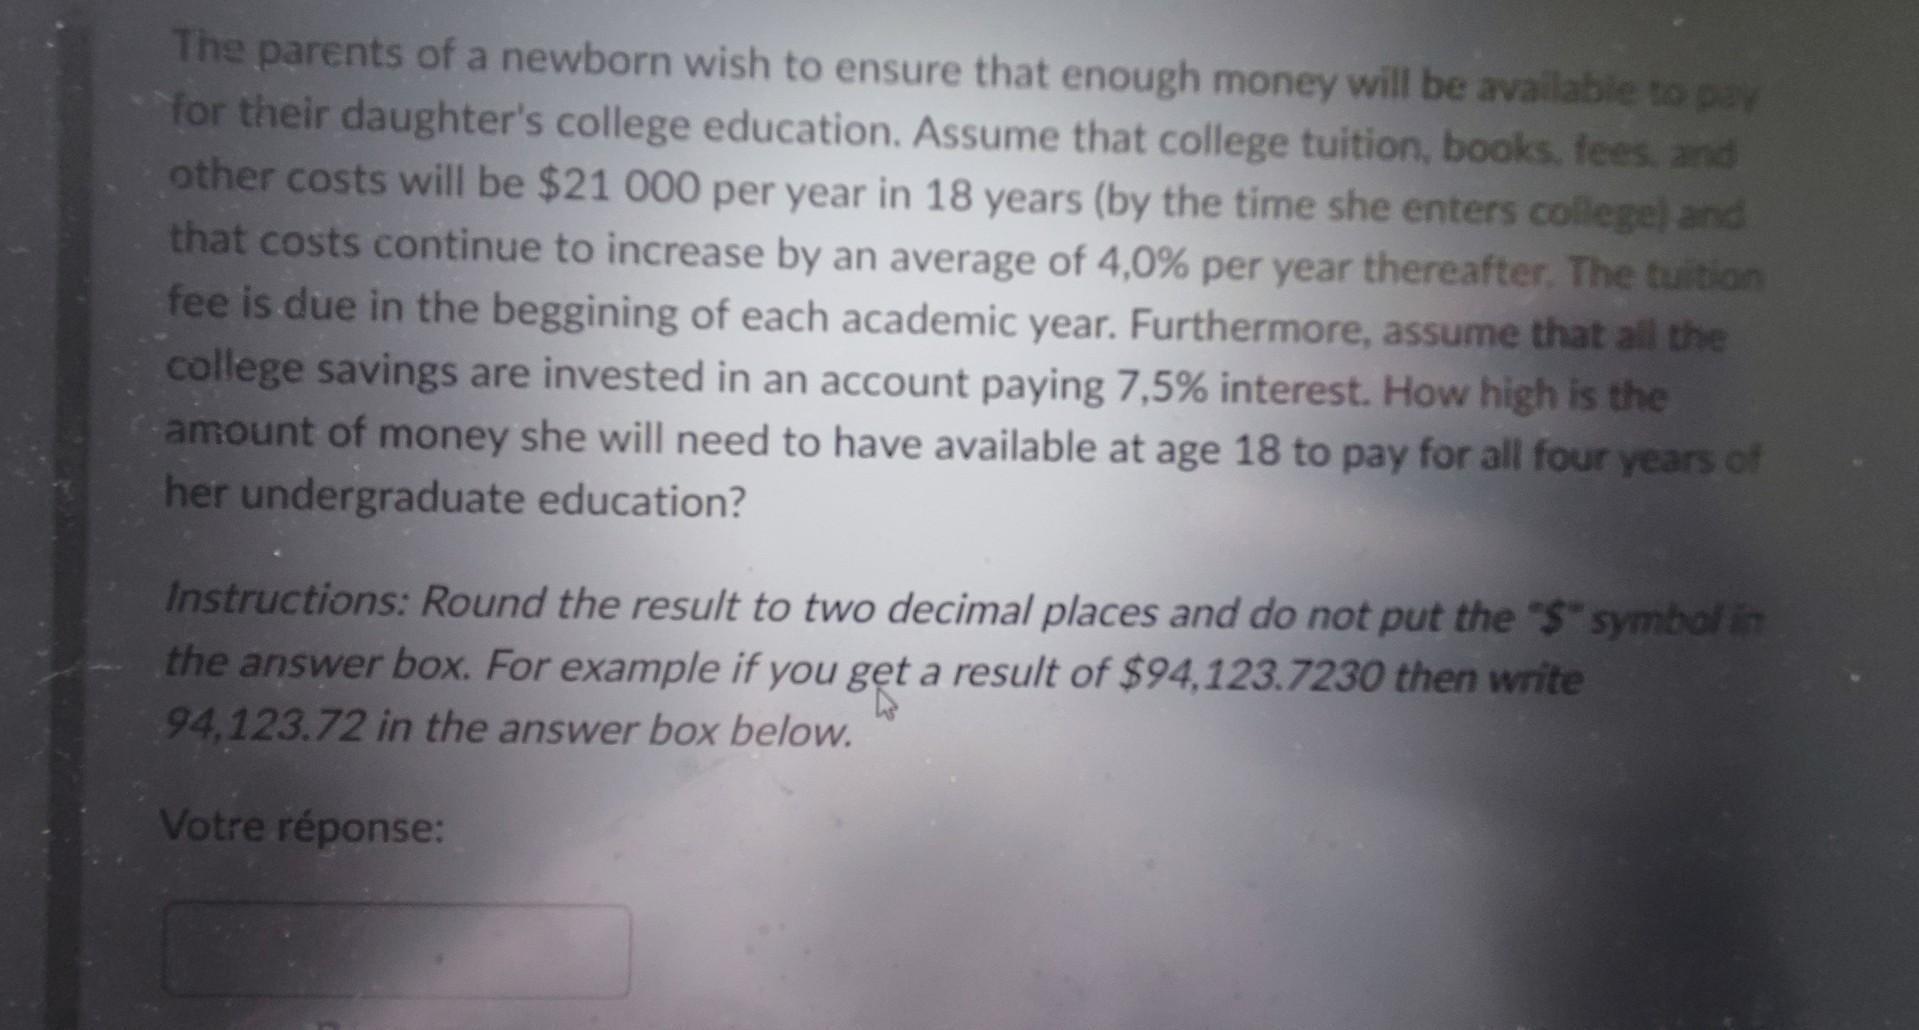 The parents of a newborn wish to ensure that enough money will be avalabie to par for their daughters college education. Ass